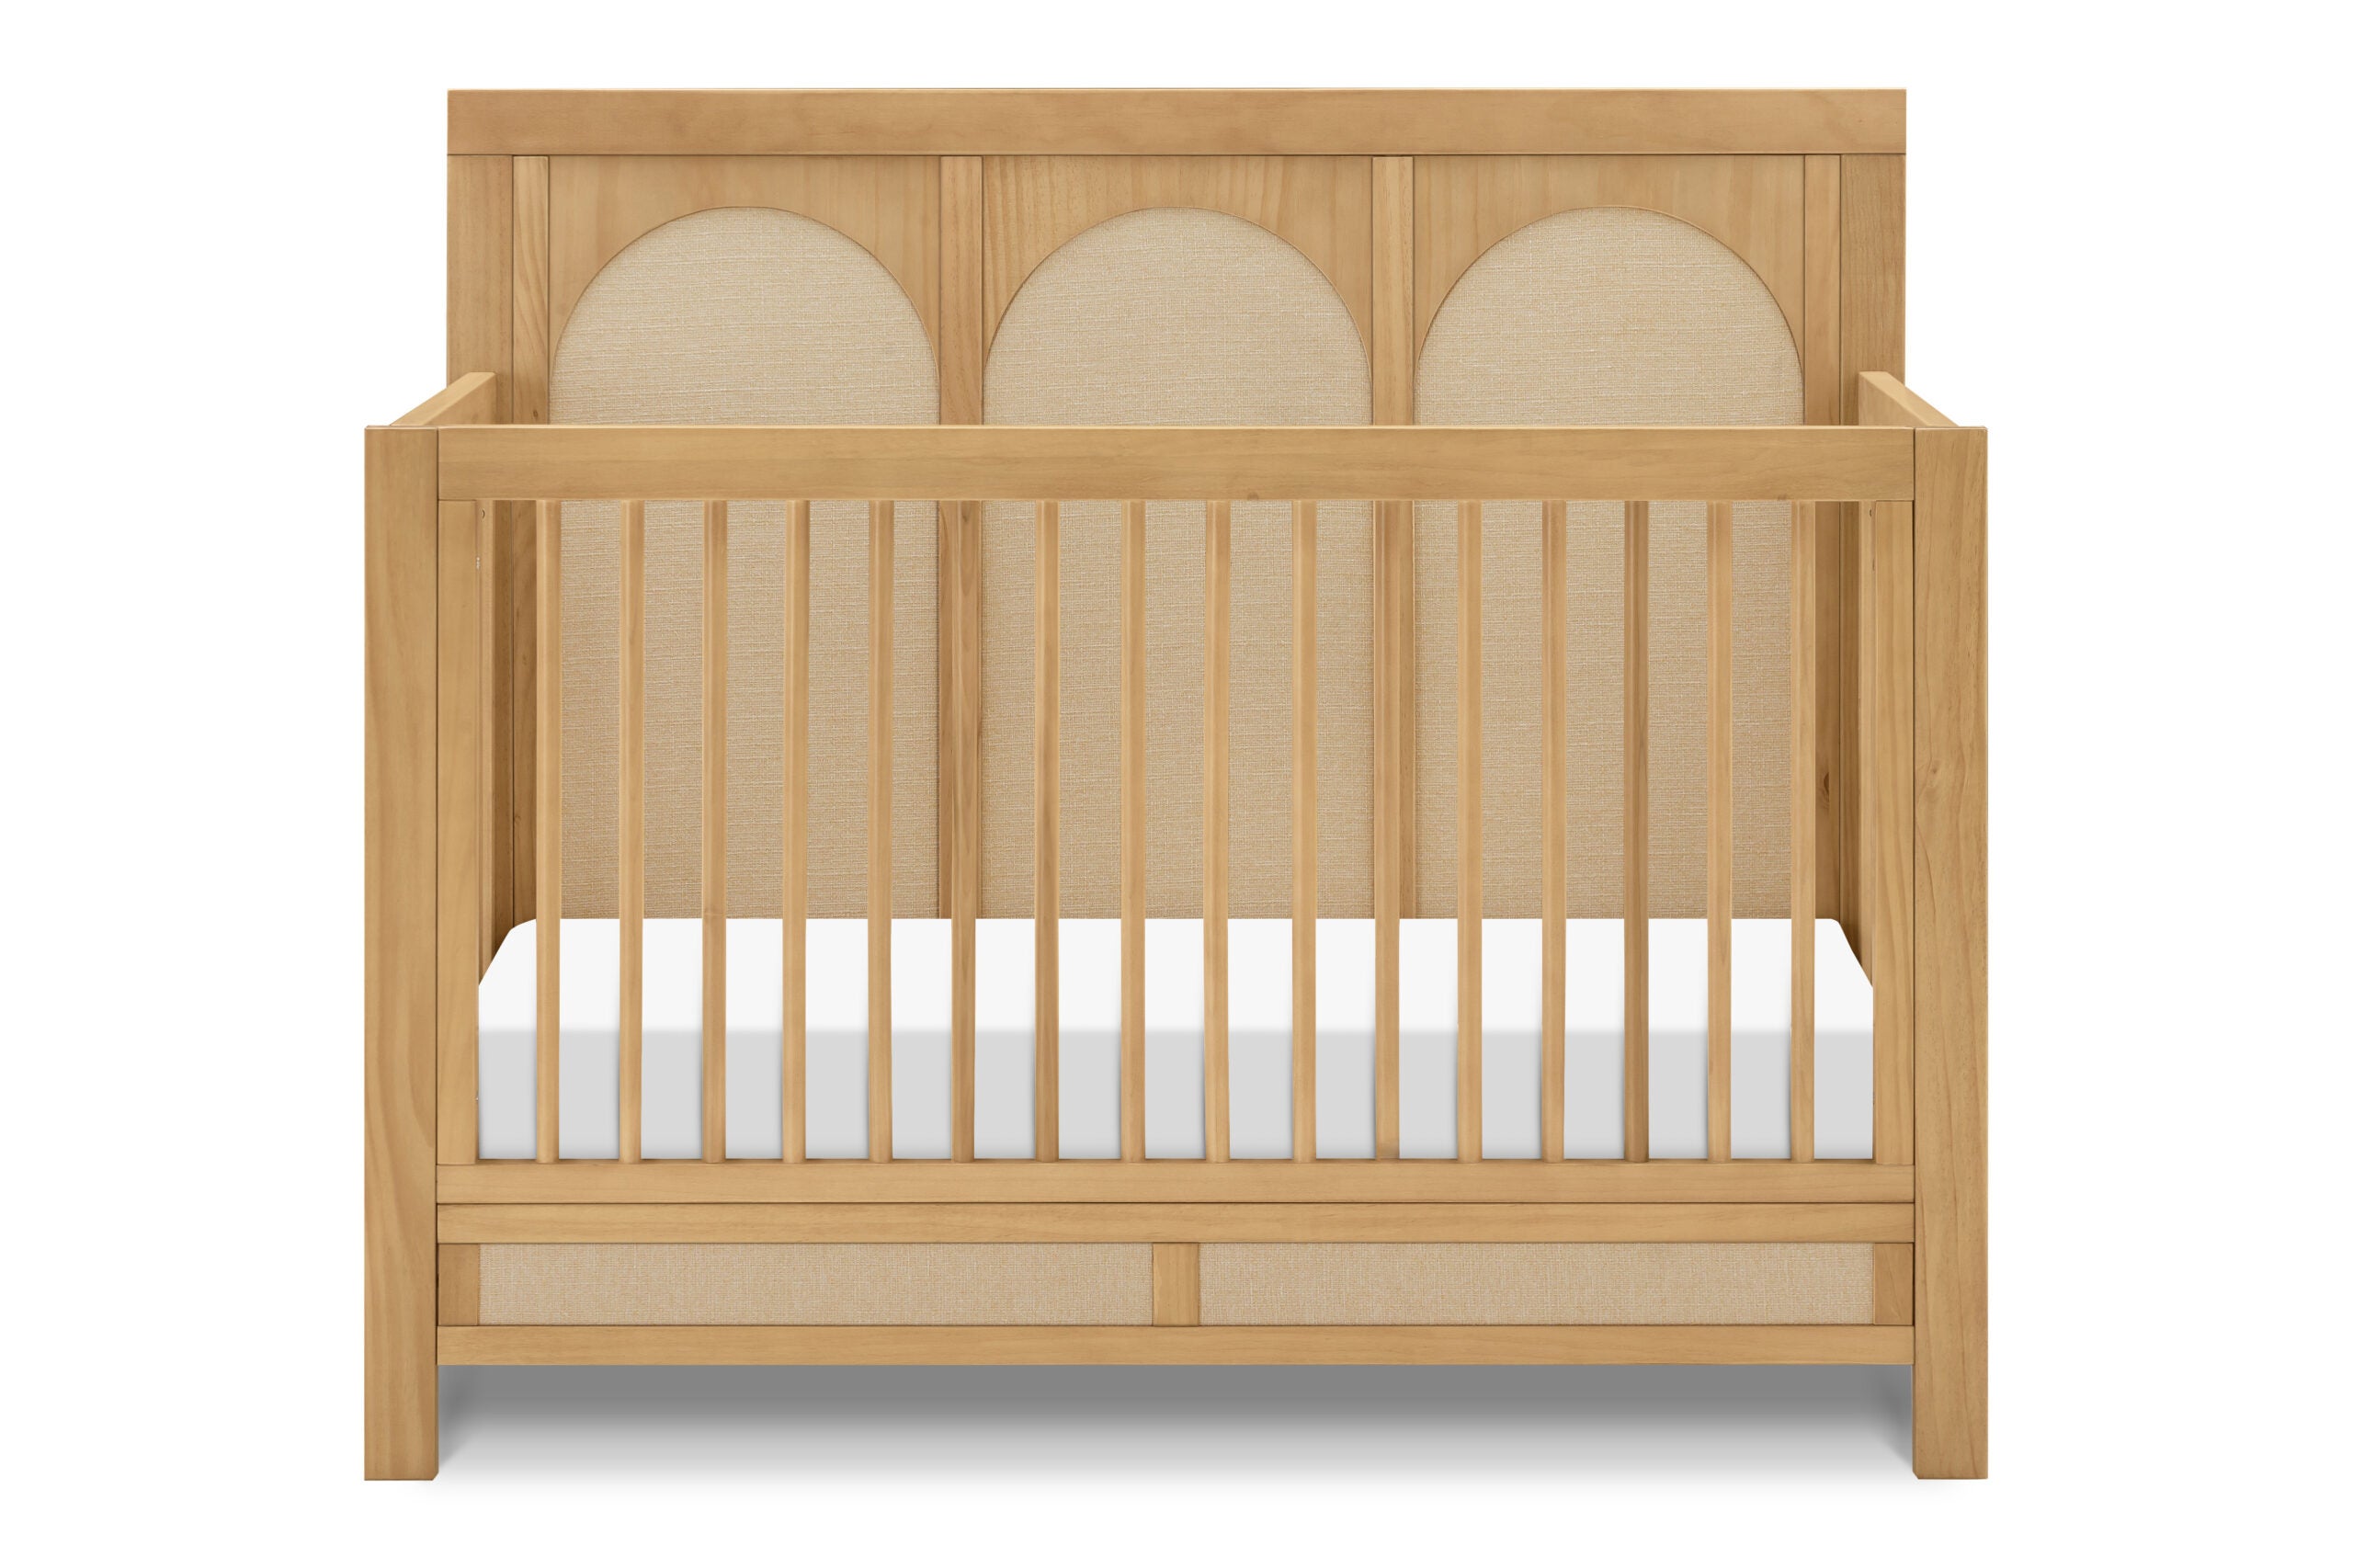 Wood crib with arches